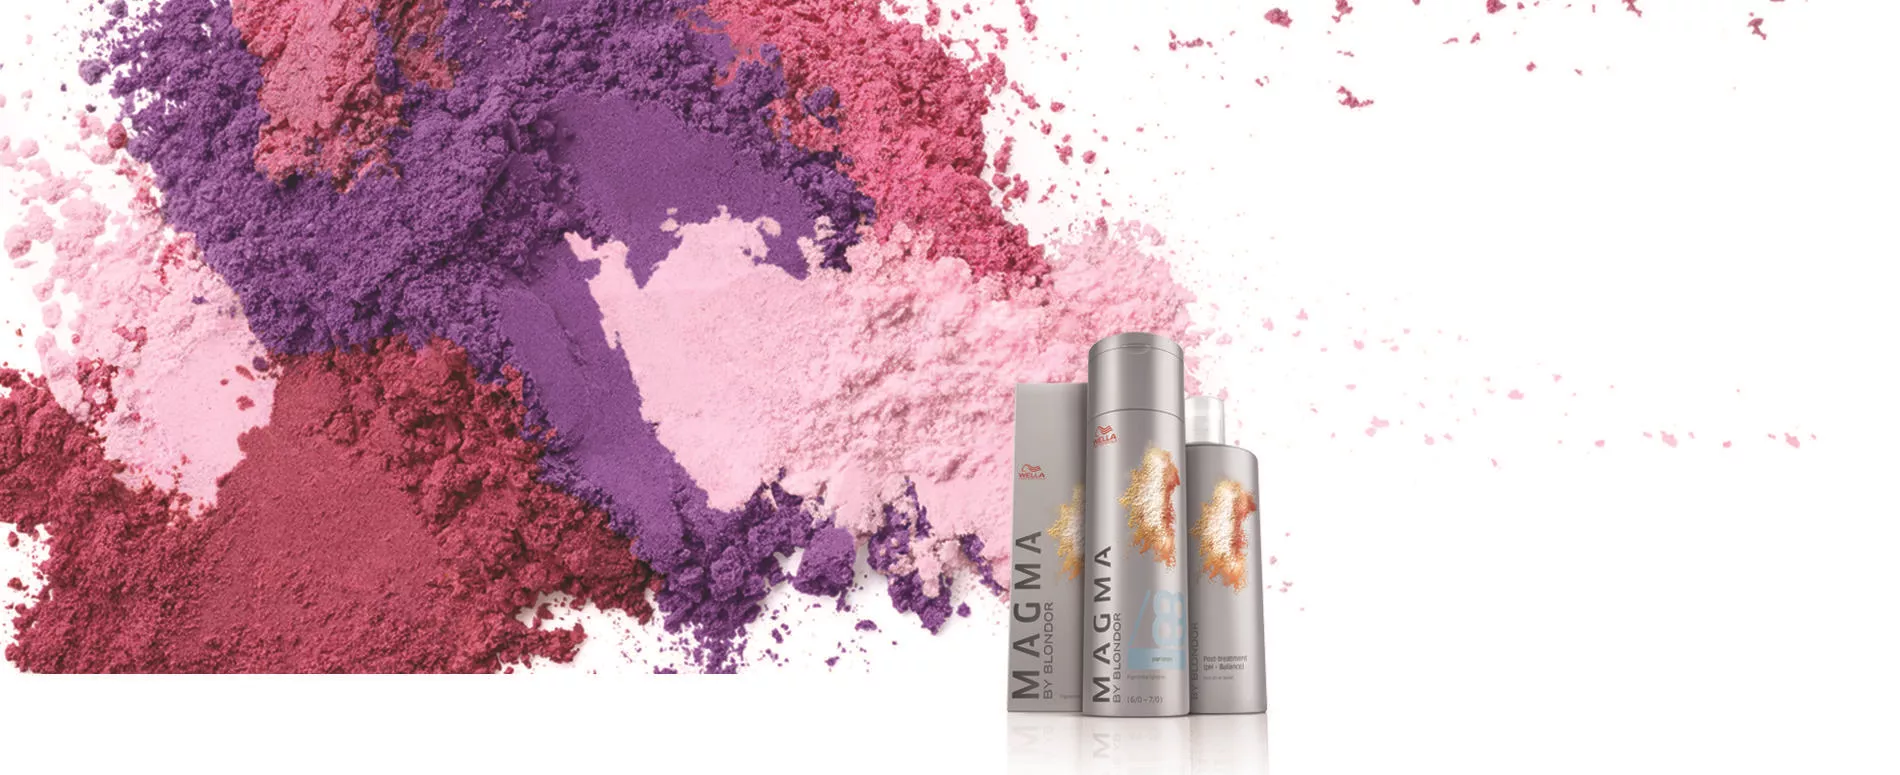 Range of Wella Professionals Magma Products with purple, pink and hot pink powders sprinkled in the background